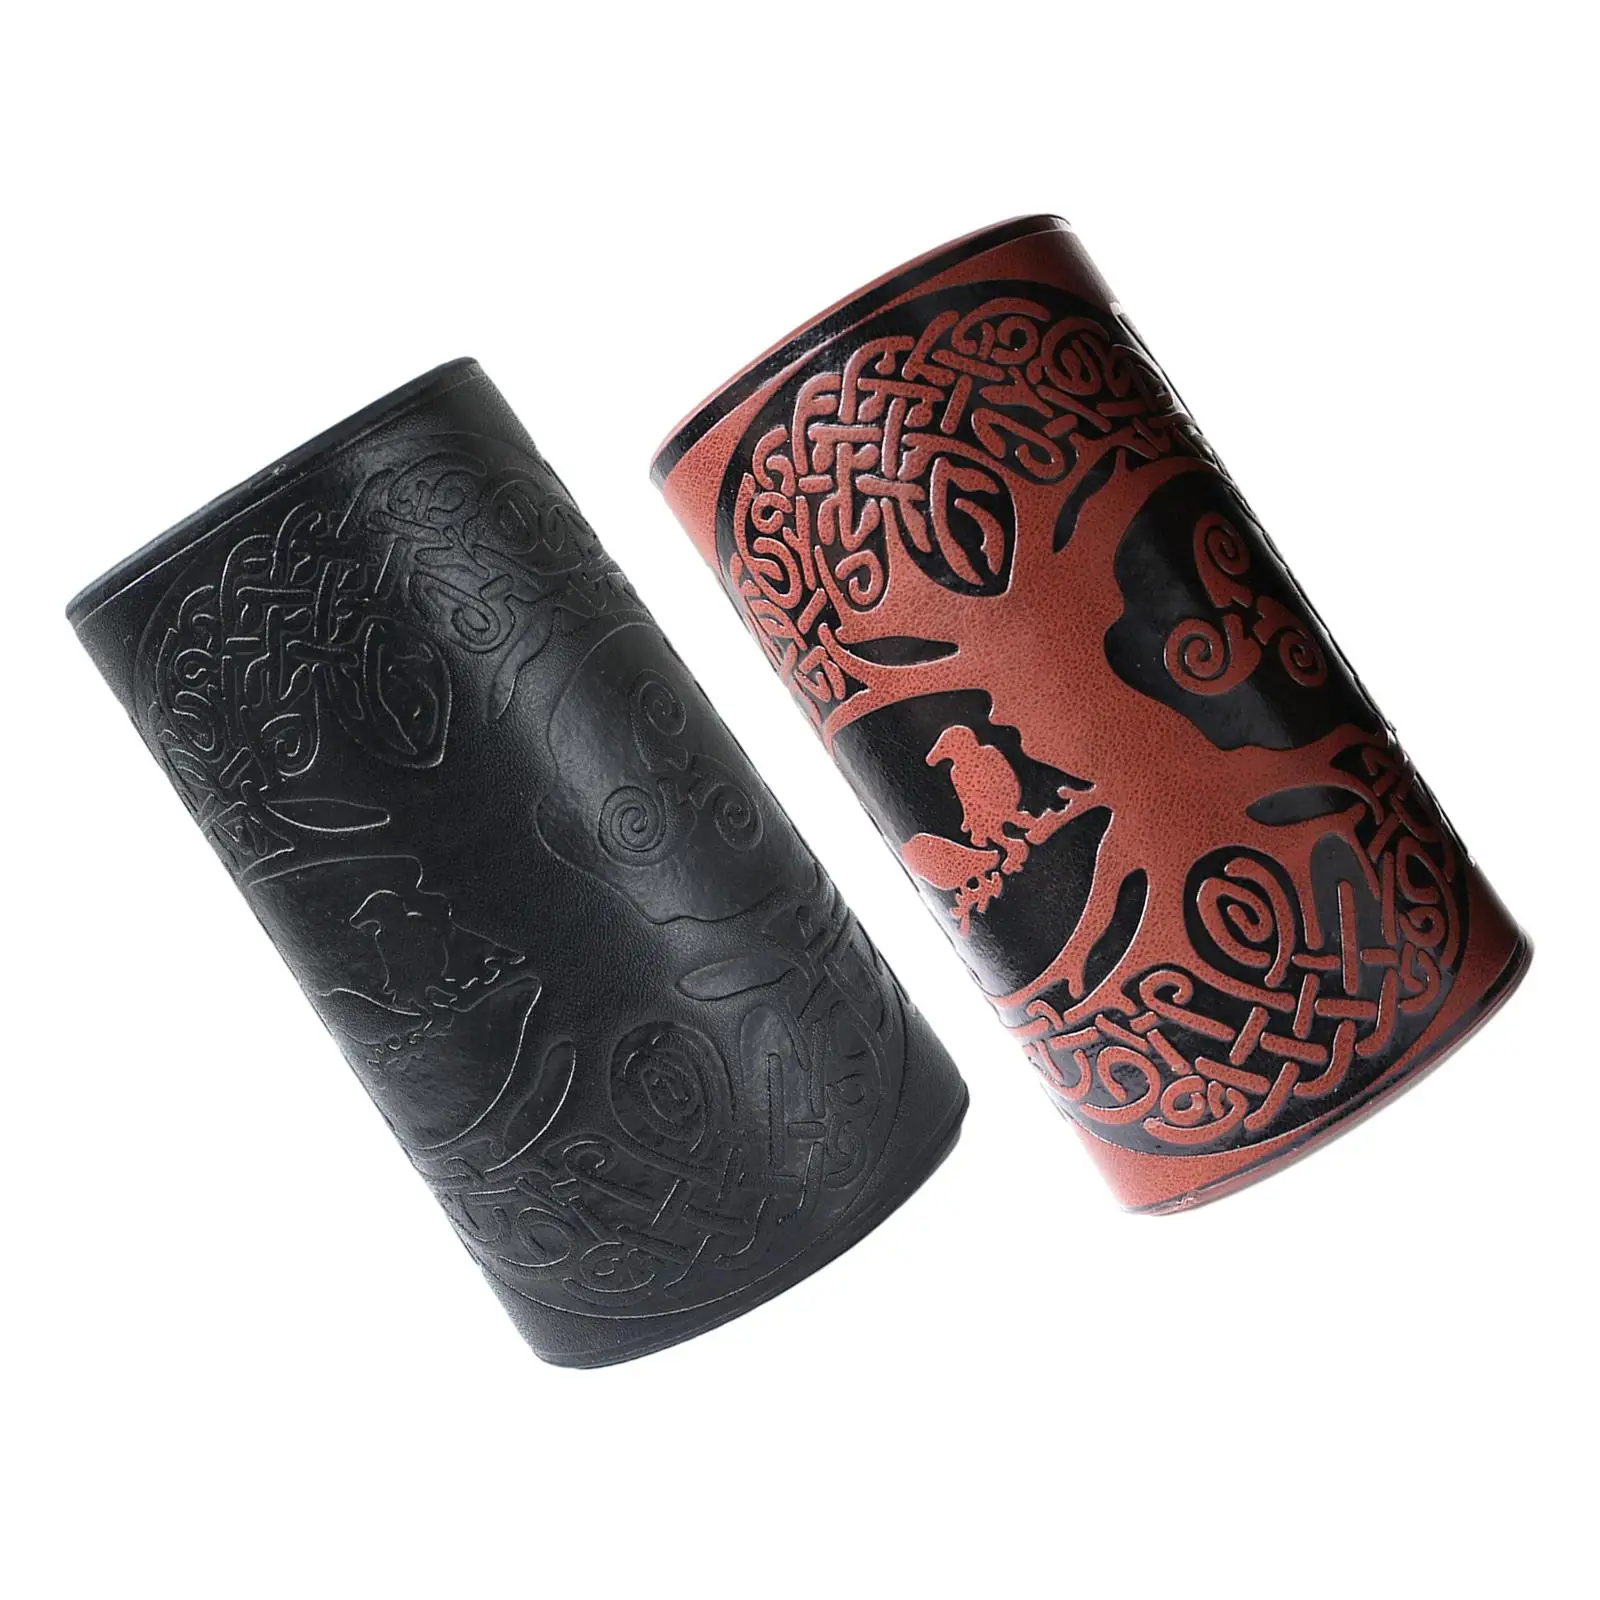 PU Leather Bracelet Medieval Men Cuff Wristband Jewelry Armor Leather Gauntlet Wristband Adjustable for Live Action Role Playing